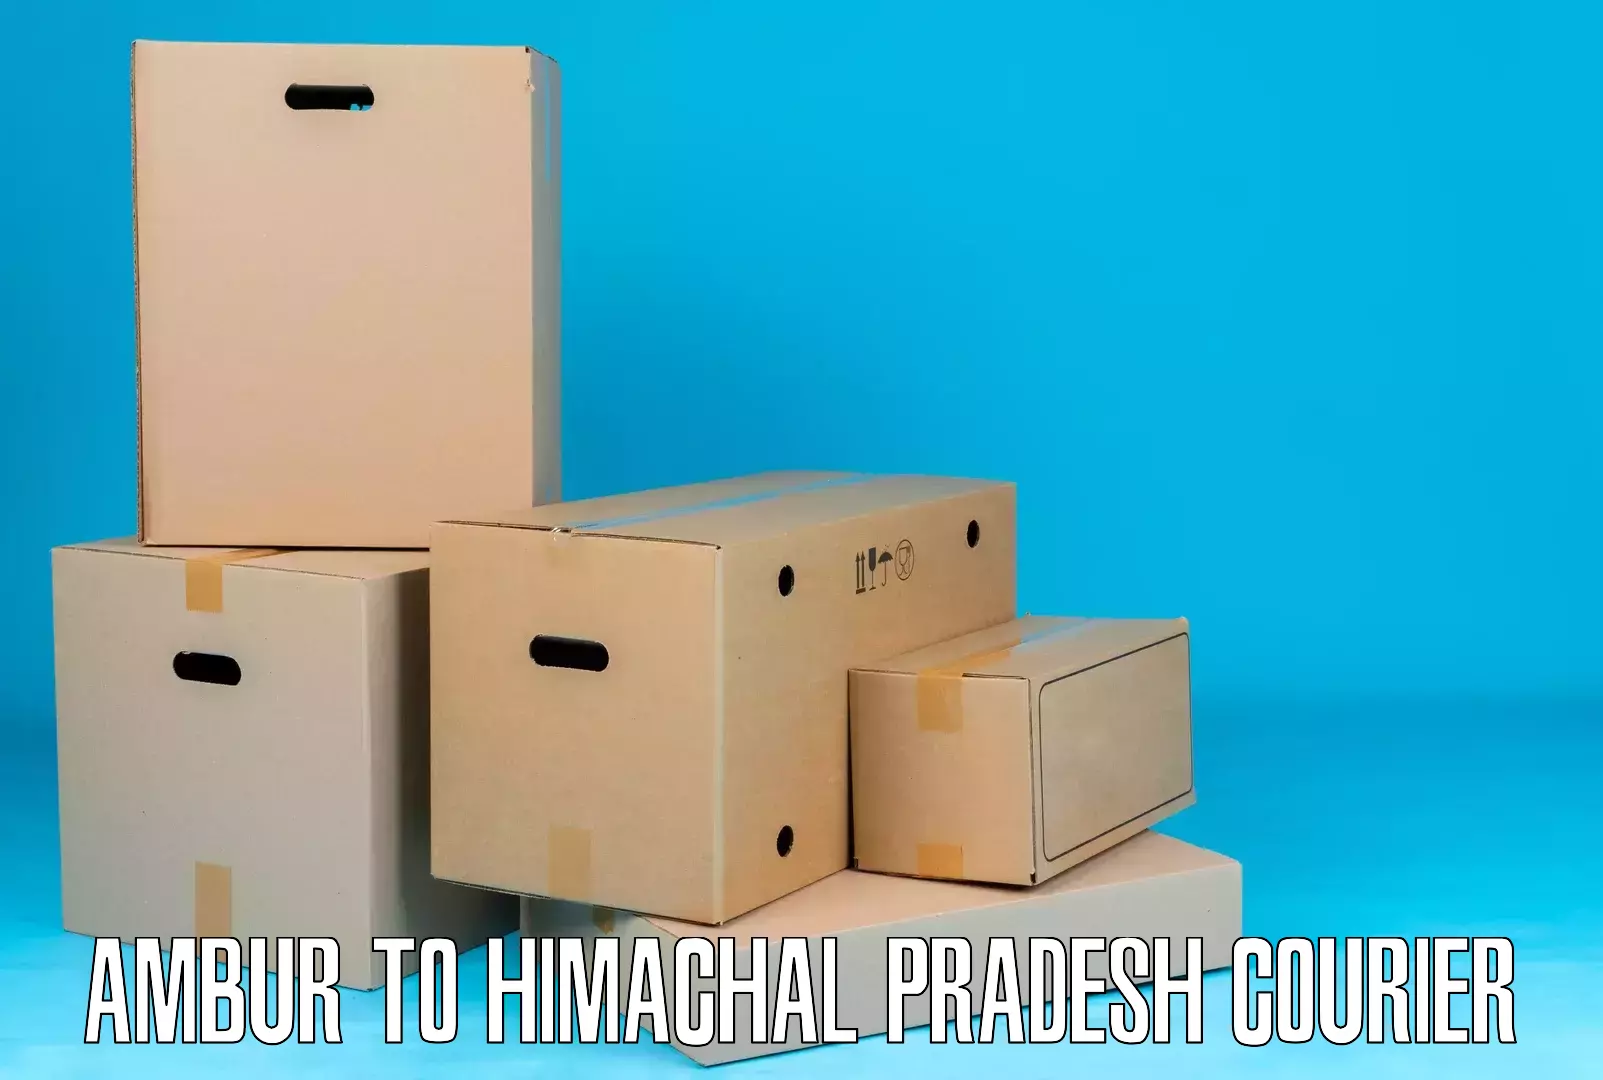 End-to-end delivery Ambur to Himachal Pradesh